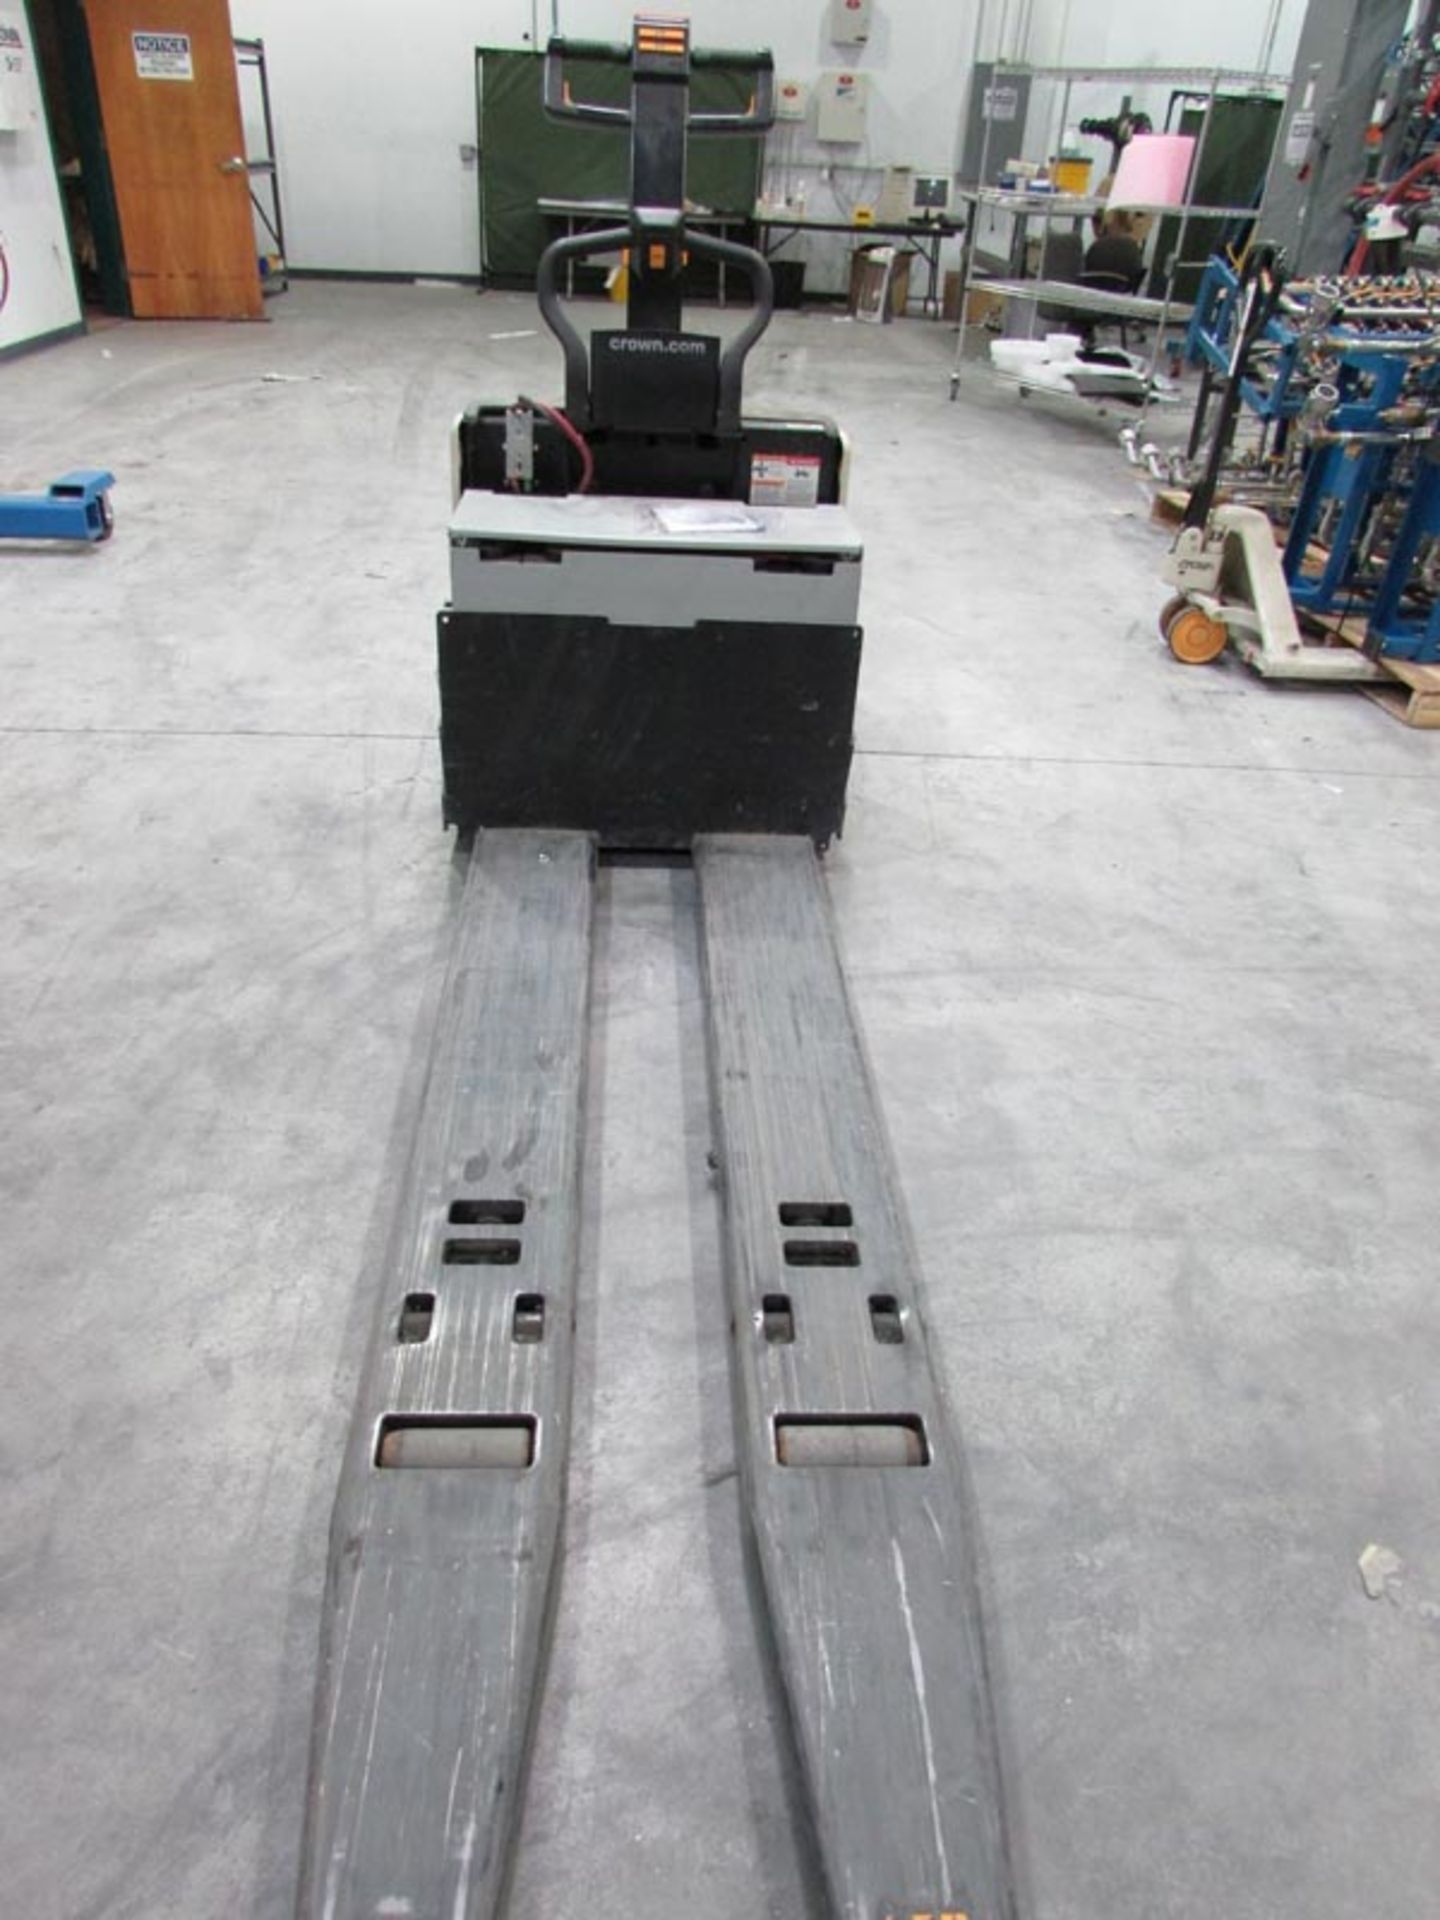 Crown Mdl: PE4500-80 24V Electric Pallet Jack 8,000Lbs Cap, 840Lbs Truck Weight, 1520Lbs Truck - Image 3 of 5